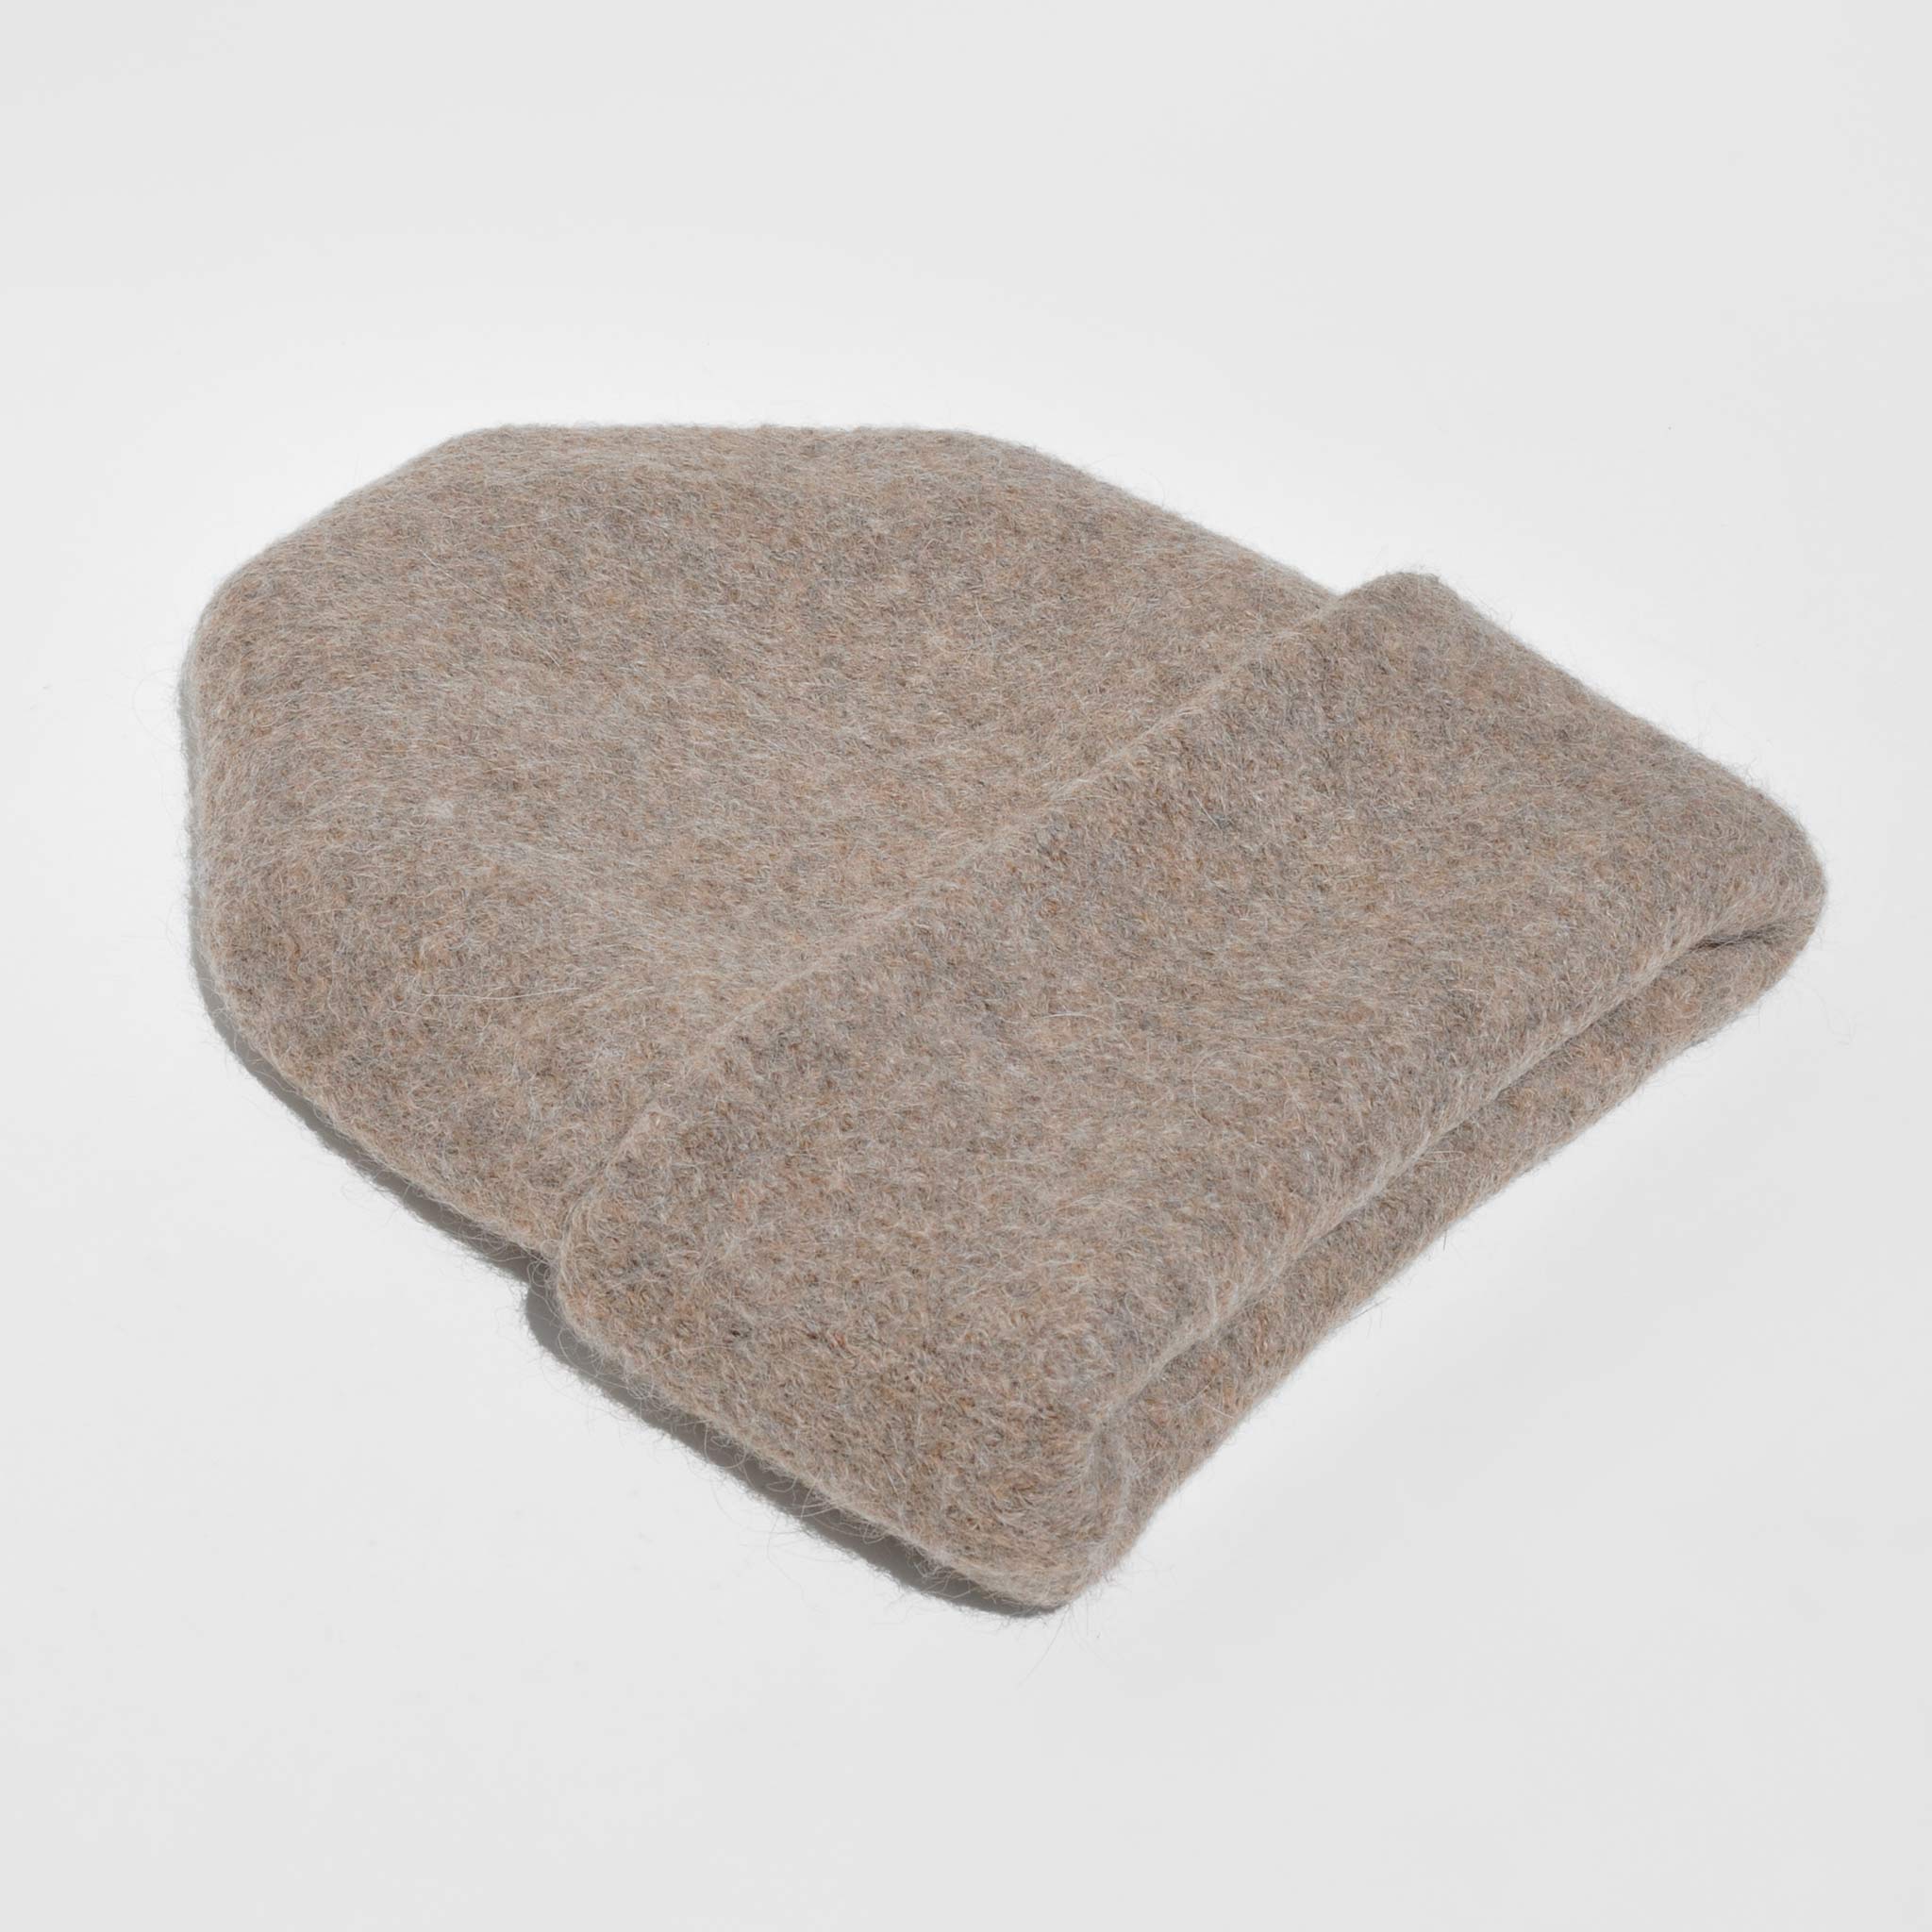 Lauren Manoogian - Carpenter Hat - Driftwood, side view. Photo displays cream oversized beanie laying on white backdrop.